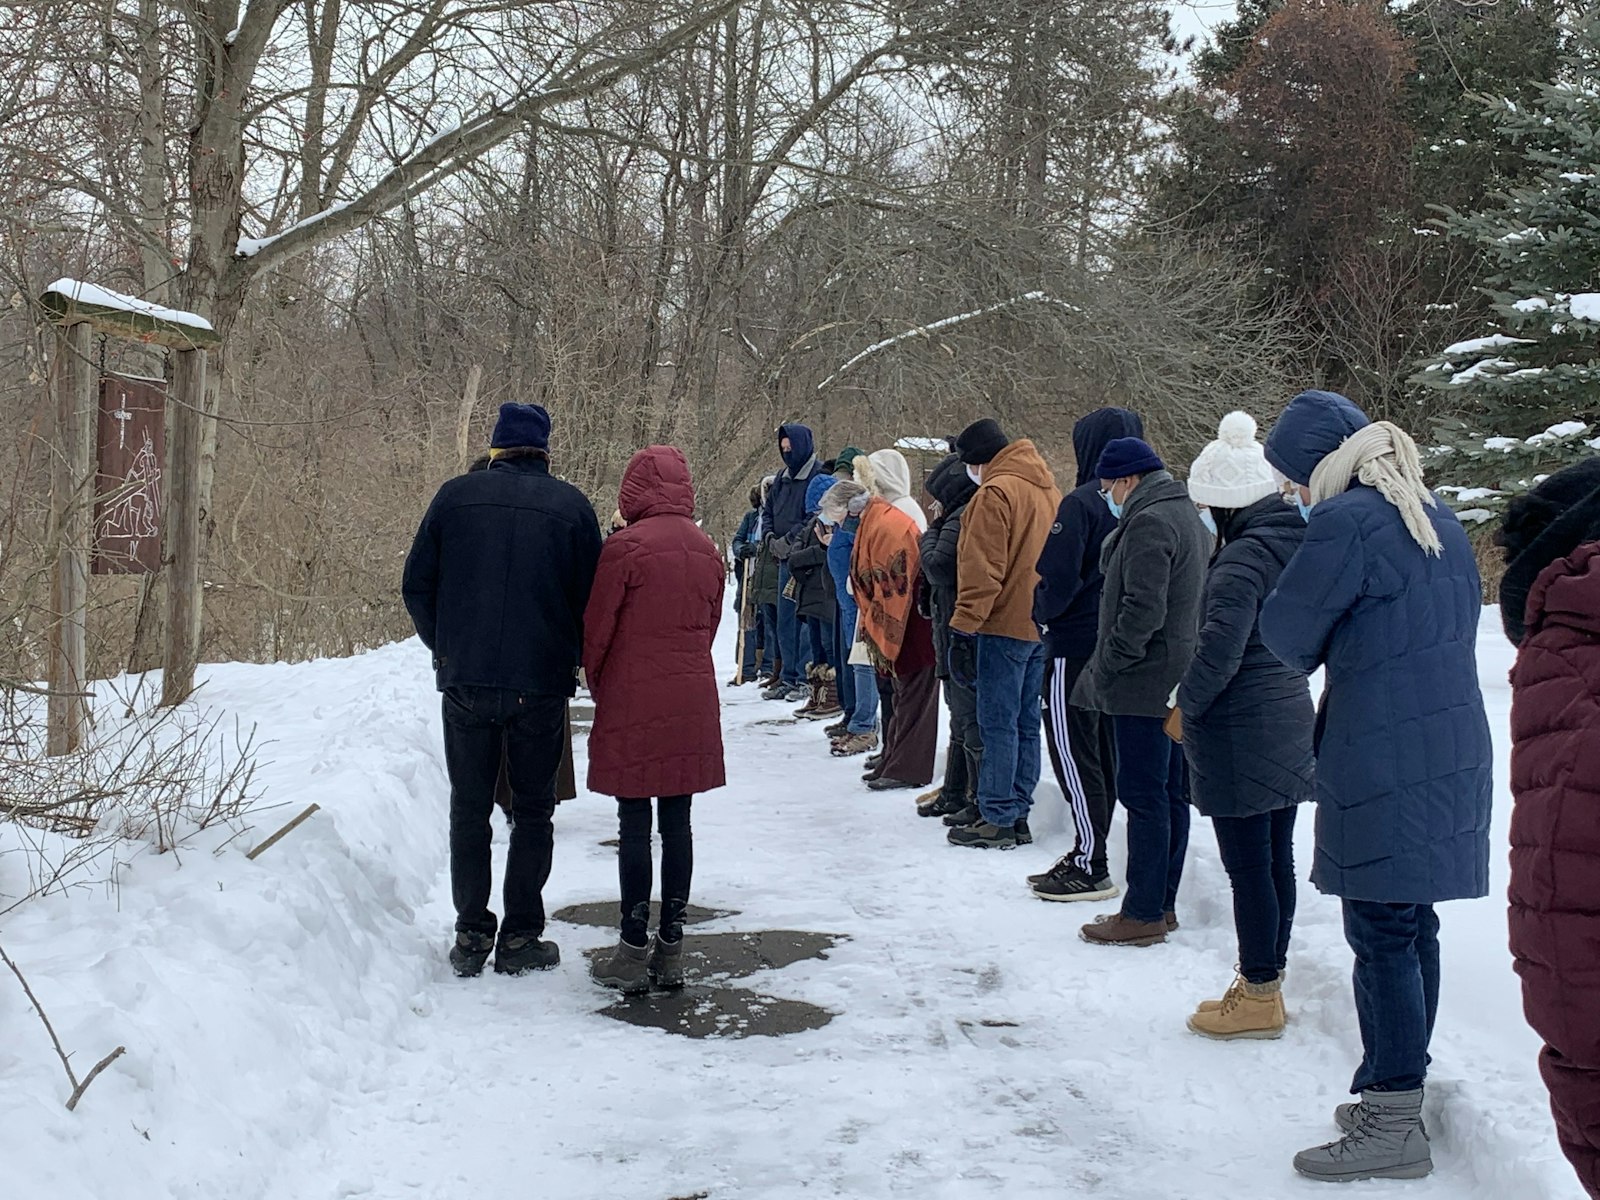 Retreatants walk the Stations of the Cross at the Capuchin Retreat Center in Washington Township. (Photo courtesy Steven Stechschulte)